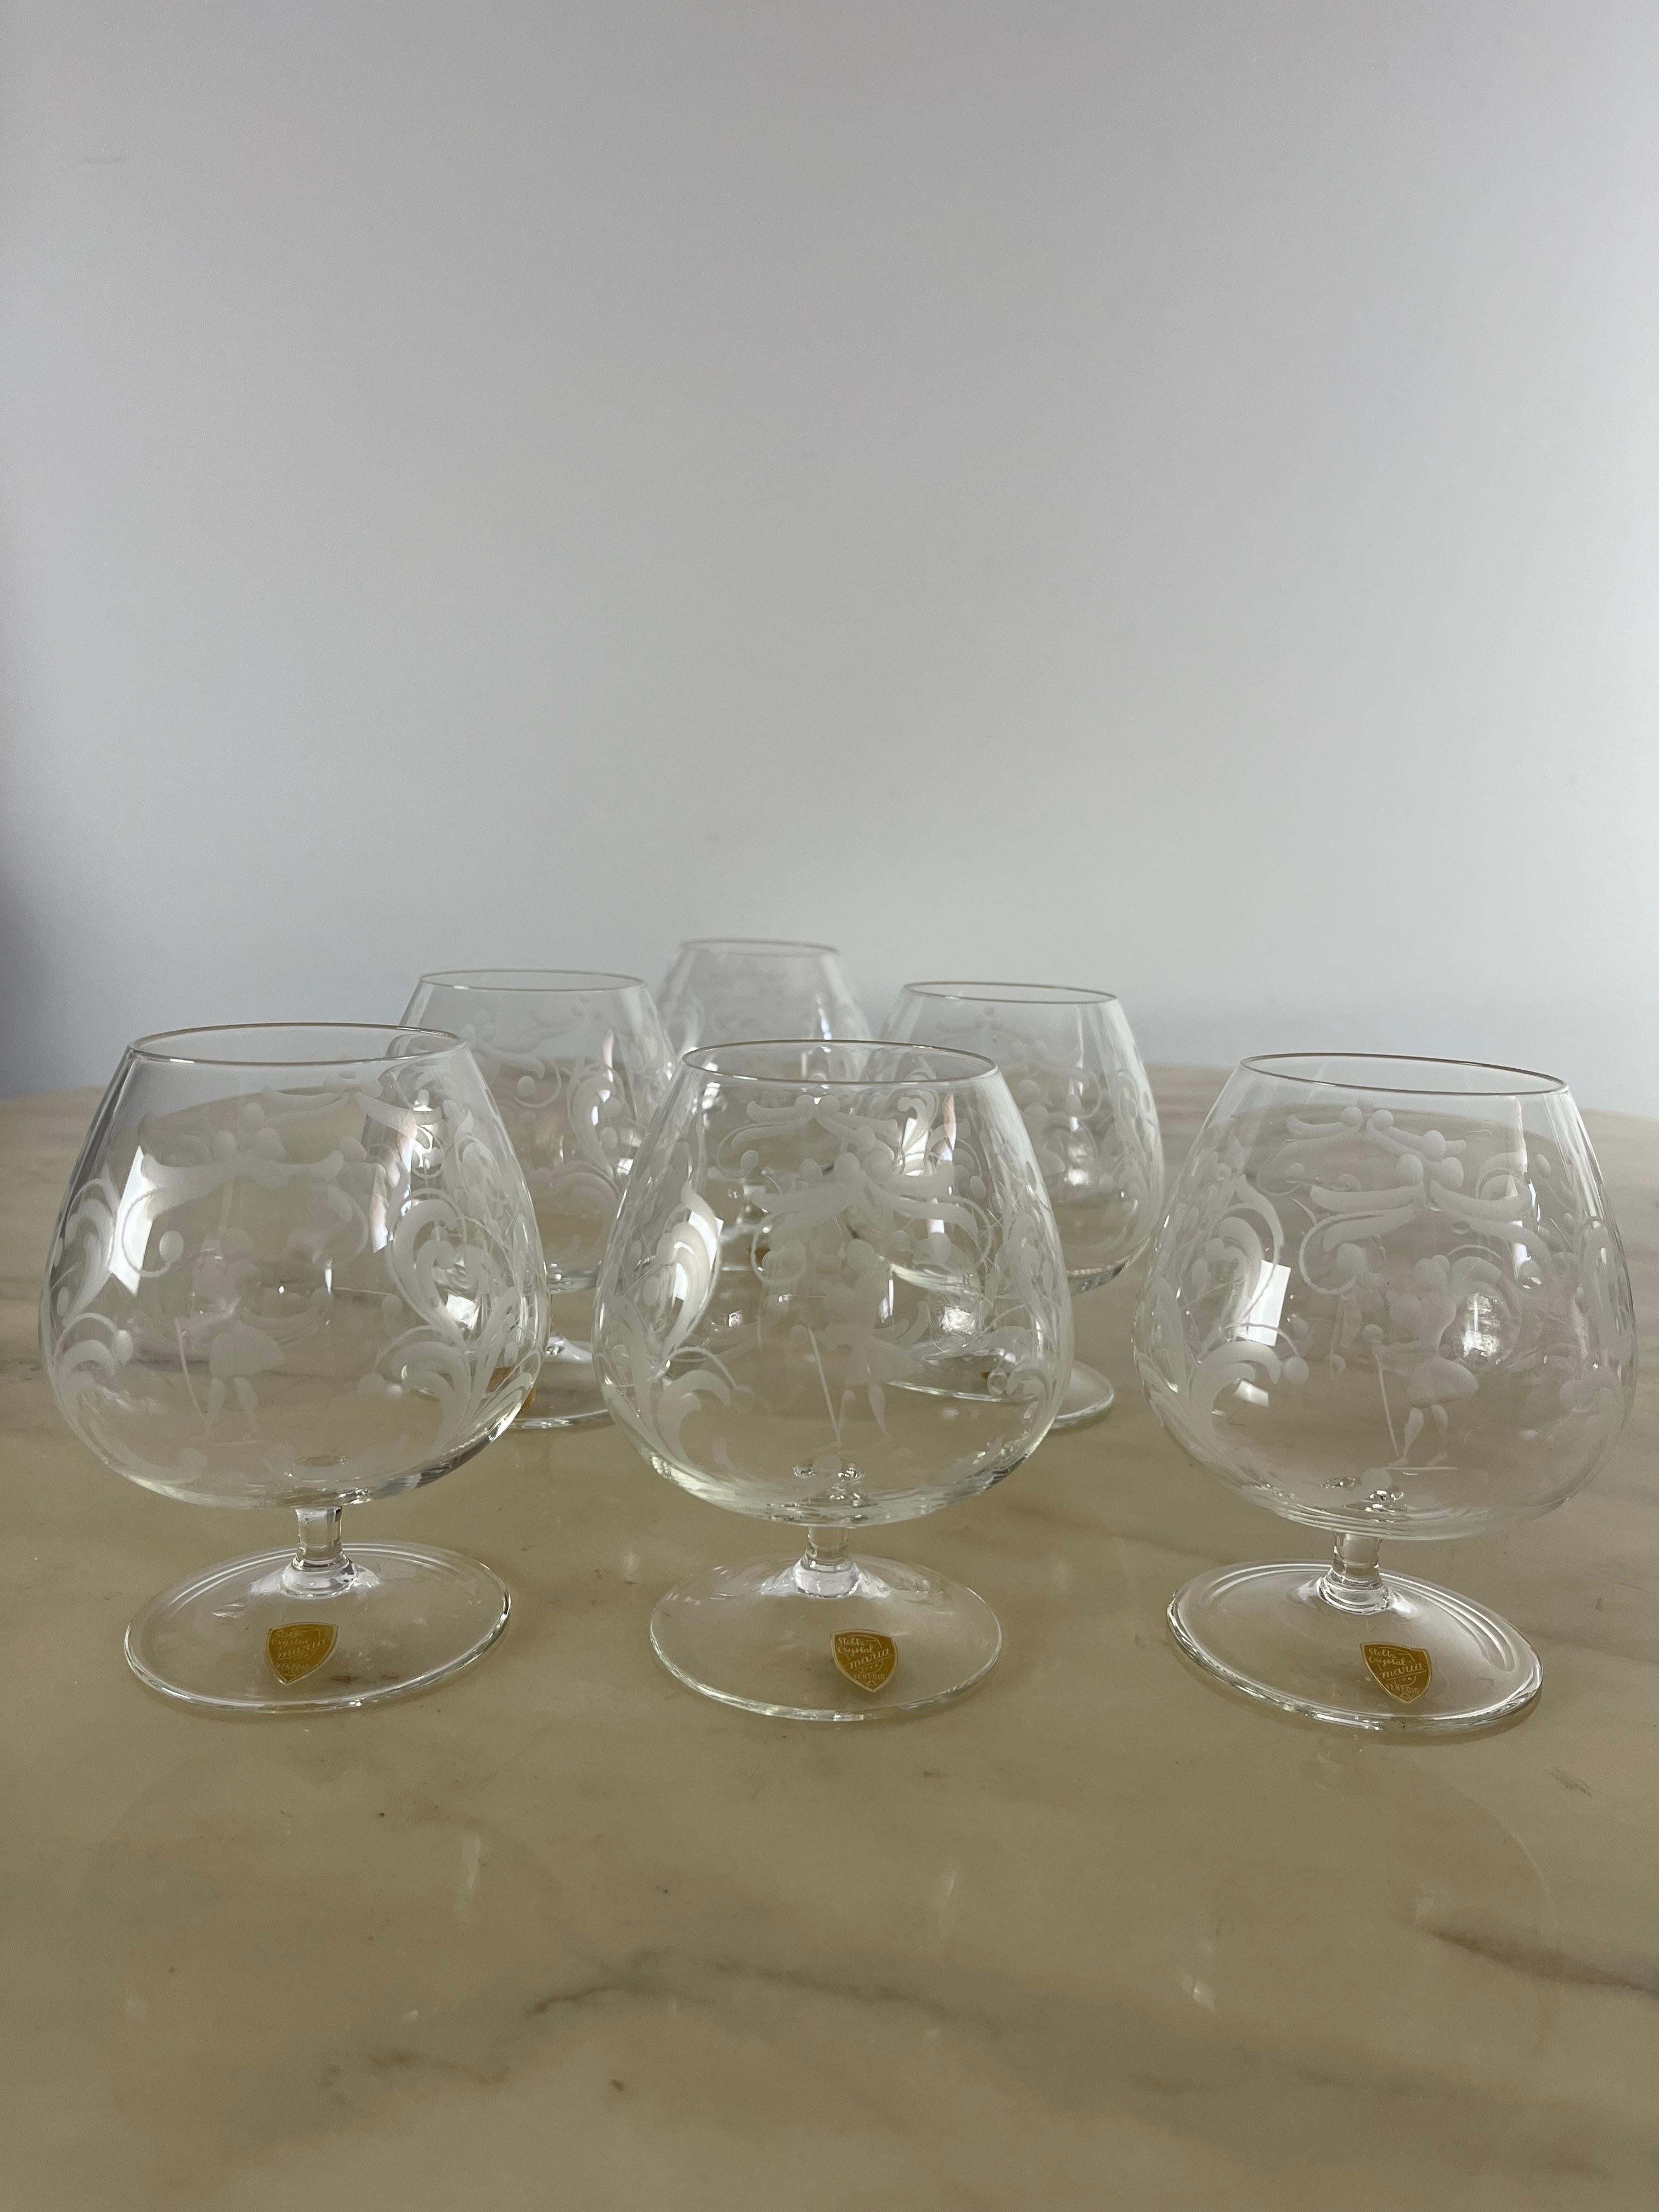 Six cognac glasses in hand-engraved crystal, Venice, 1960s.
Intact, always kept and never used. Very light, probably blown glass. Hand engraved. The diameter is 10 cm in the most pot-bellied part; The mouth has a diameter of 6 cm.
Very small signs